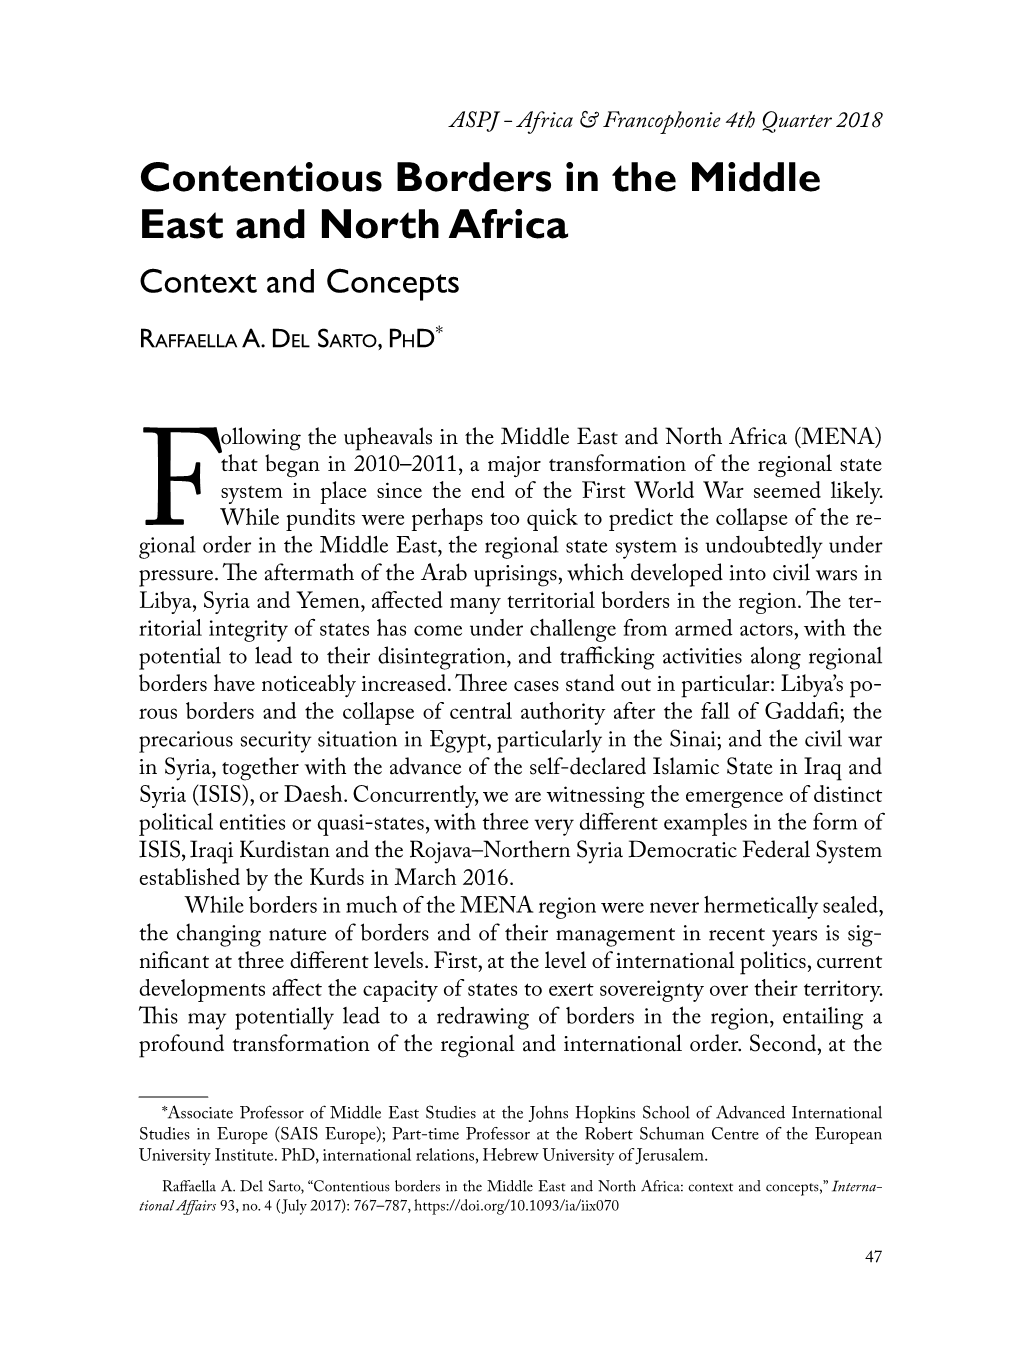 Contentious Borders in the Middle East and North Africa Context and Concepts